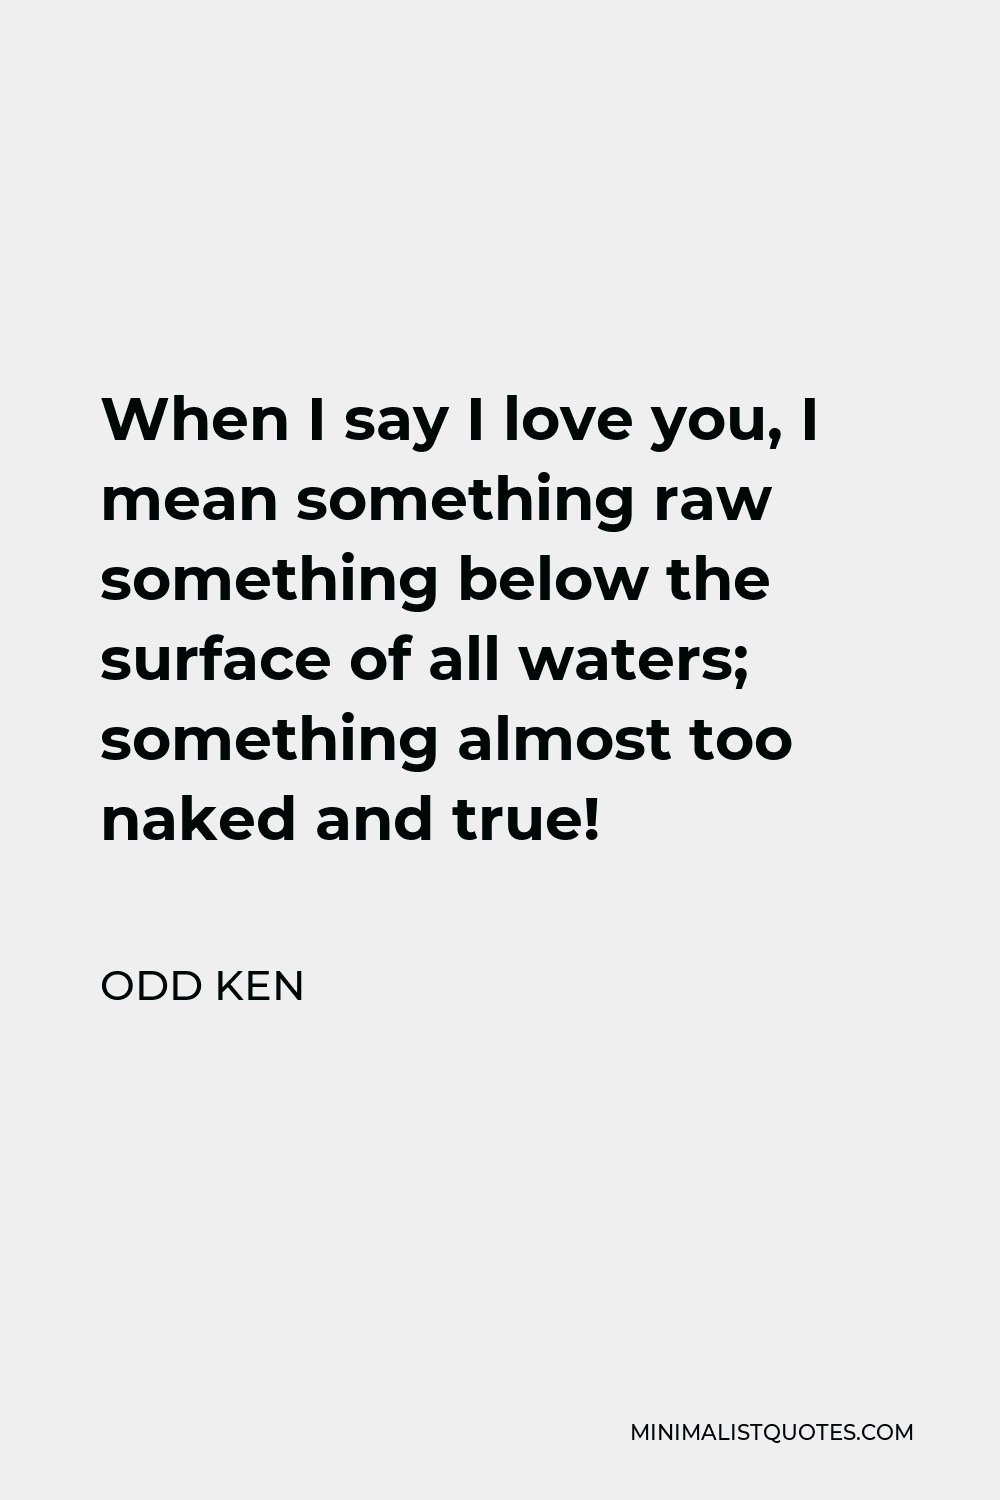 Odd Ken Quote - When I say I love you, I mean something raw something below the surface of all waters; something almost too naked and true!